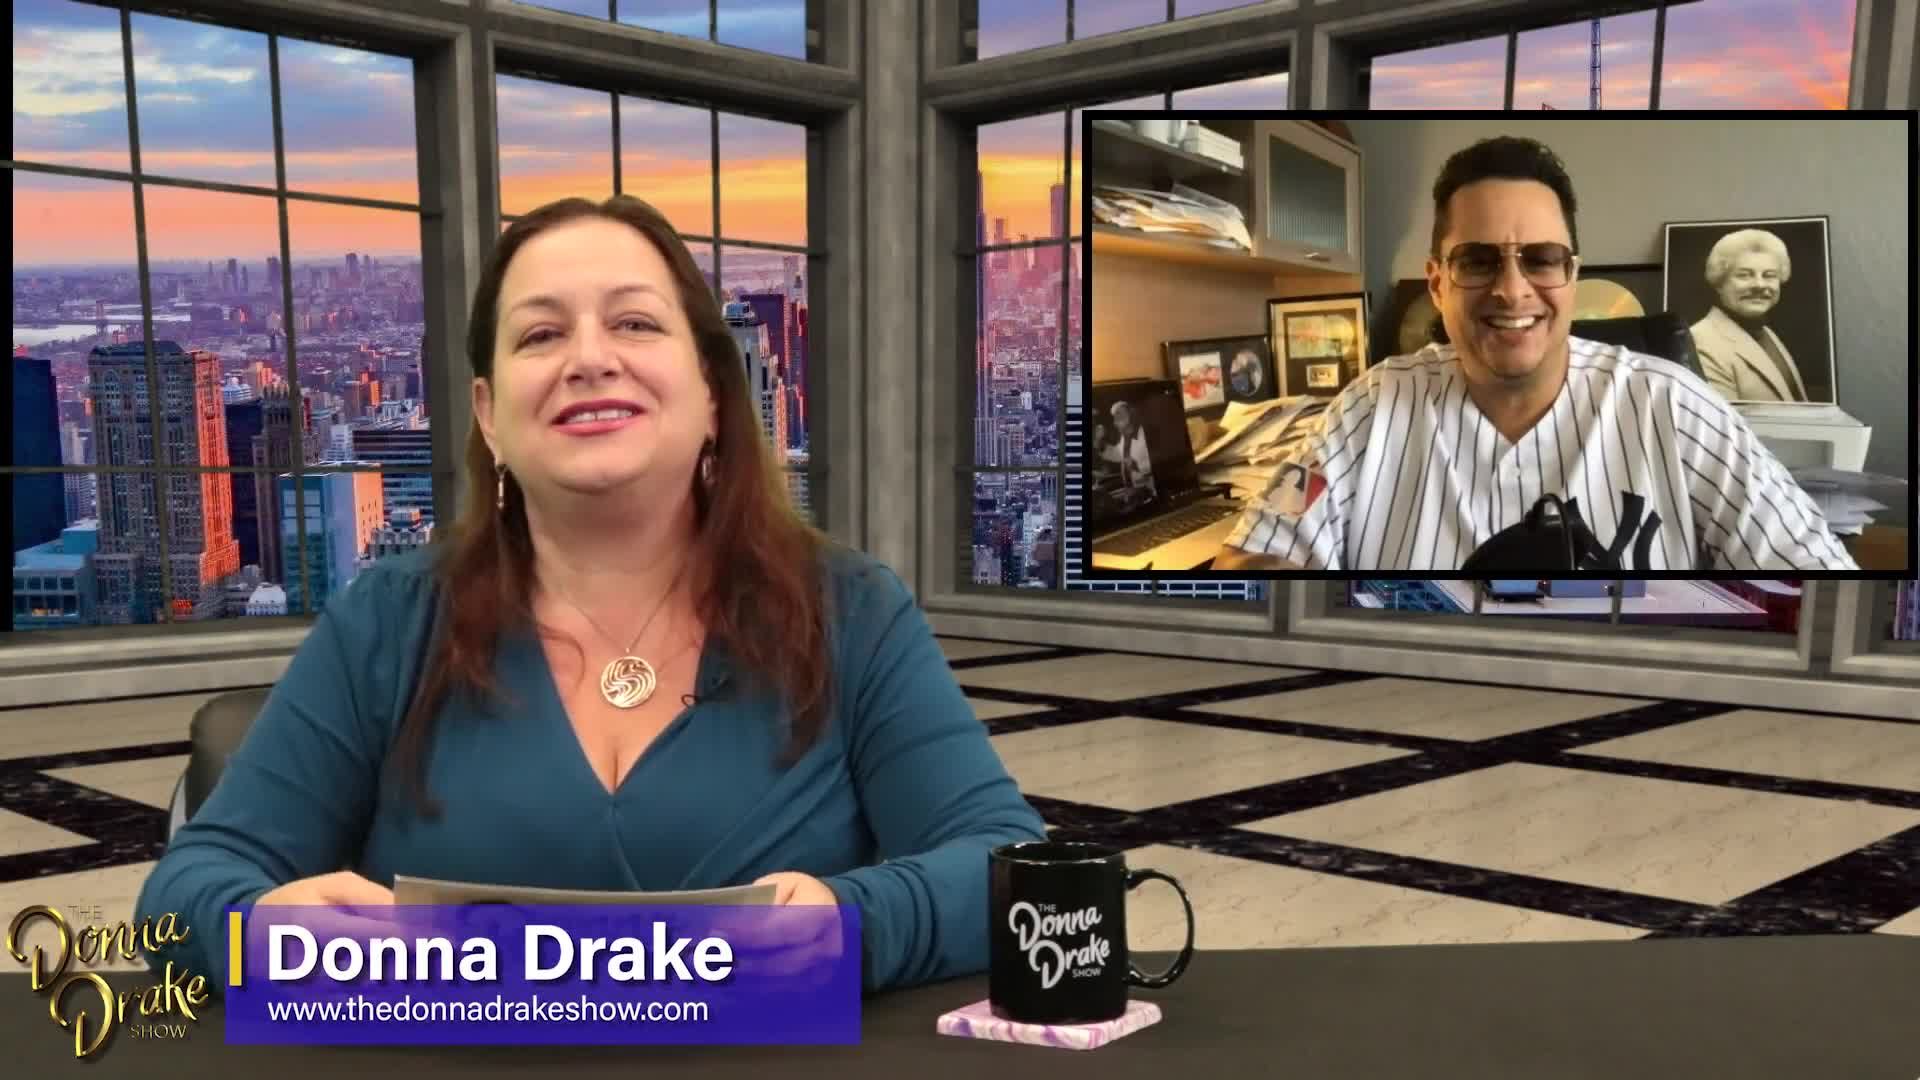 The Donna Drake Show Welcomes Tito Puente Jr.